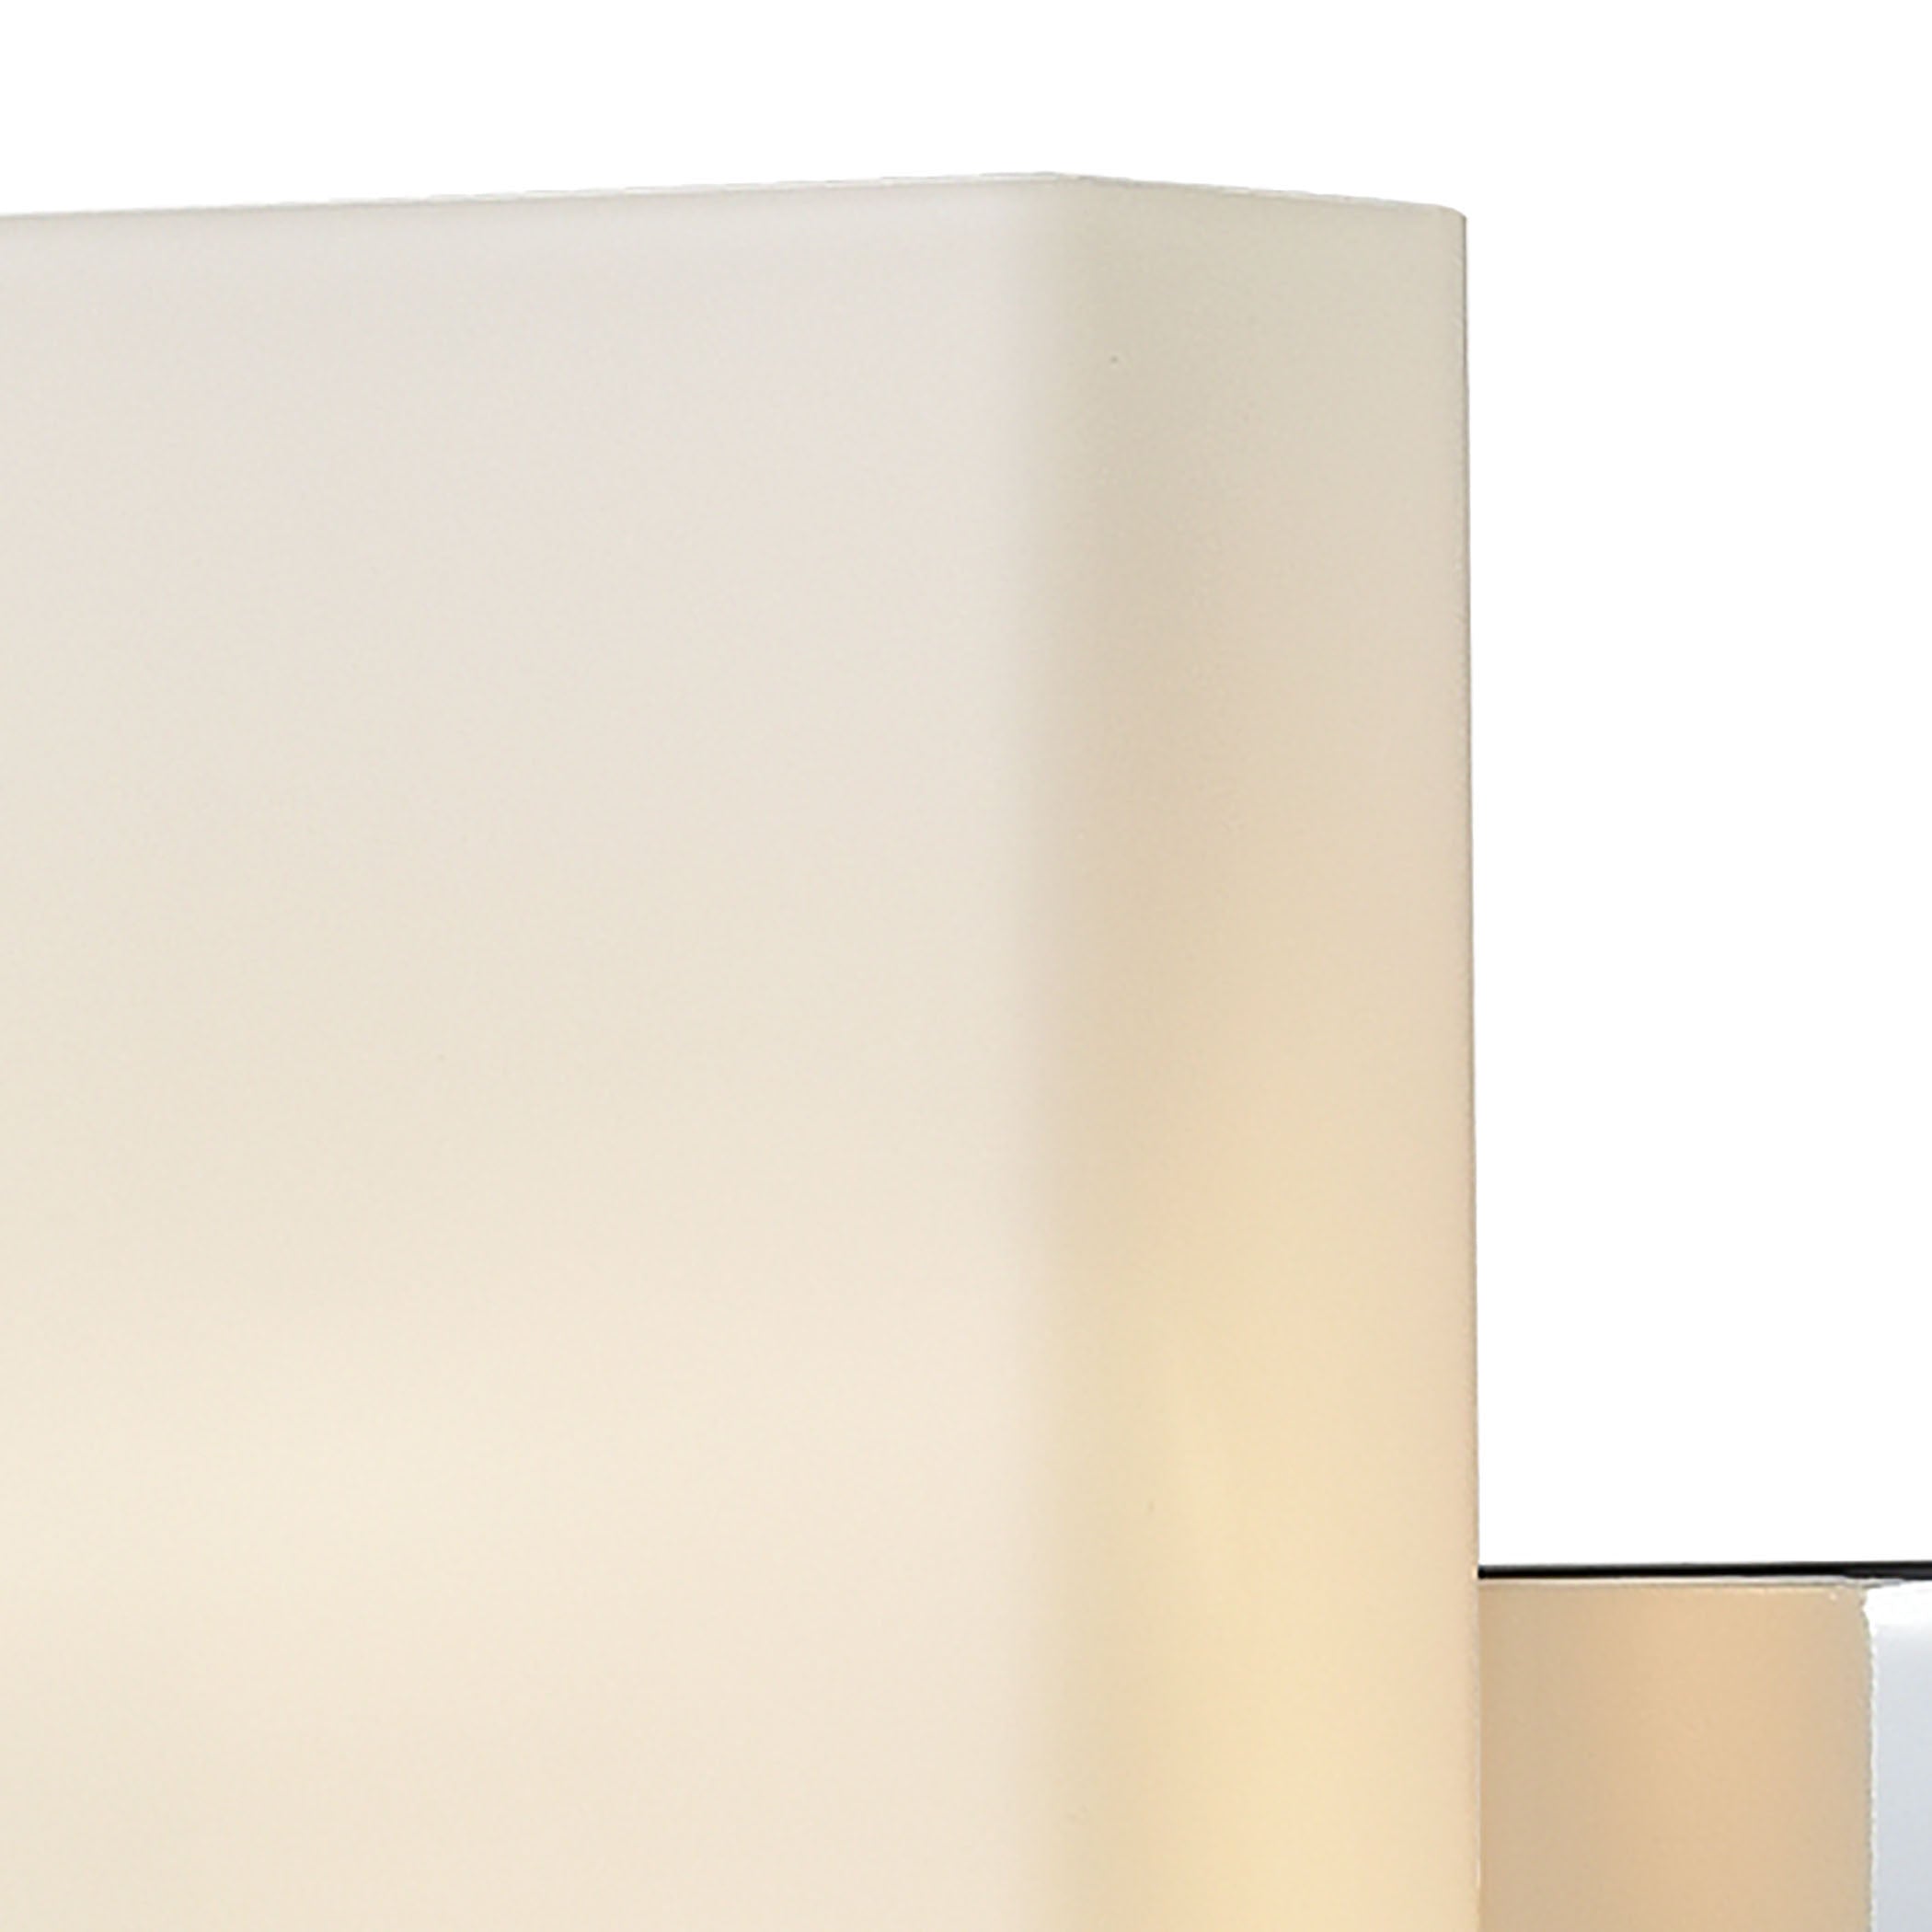 ELK Lighting 19503/4 Balcony 4-Light Vanity Sconce in Polished Chrome with Opal White Glass